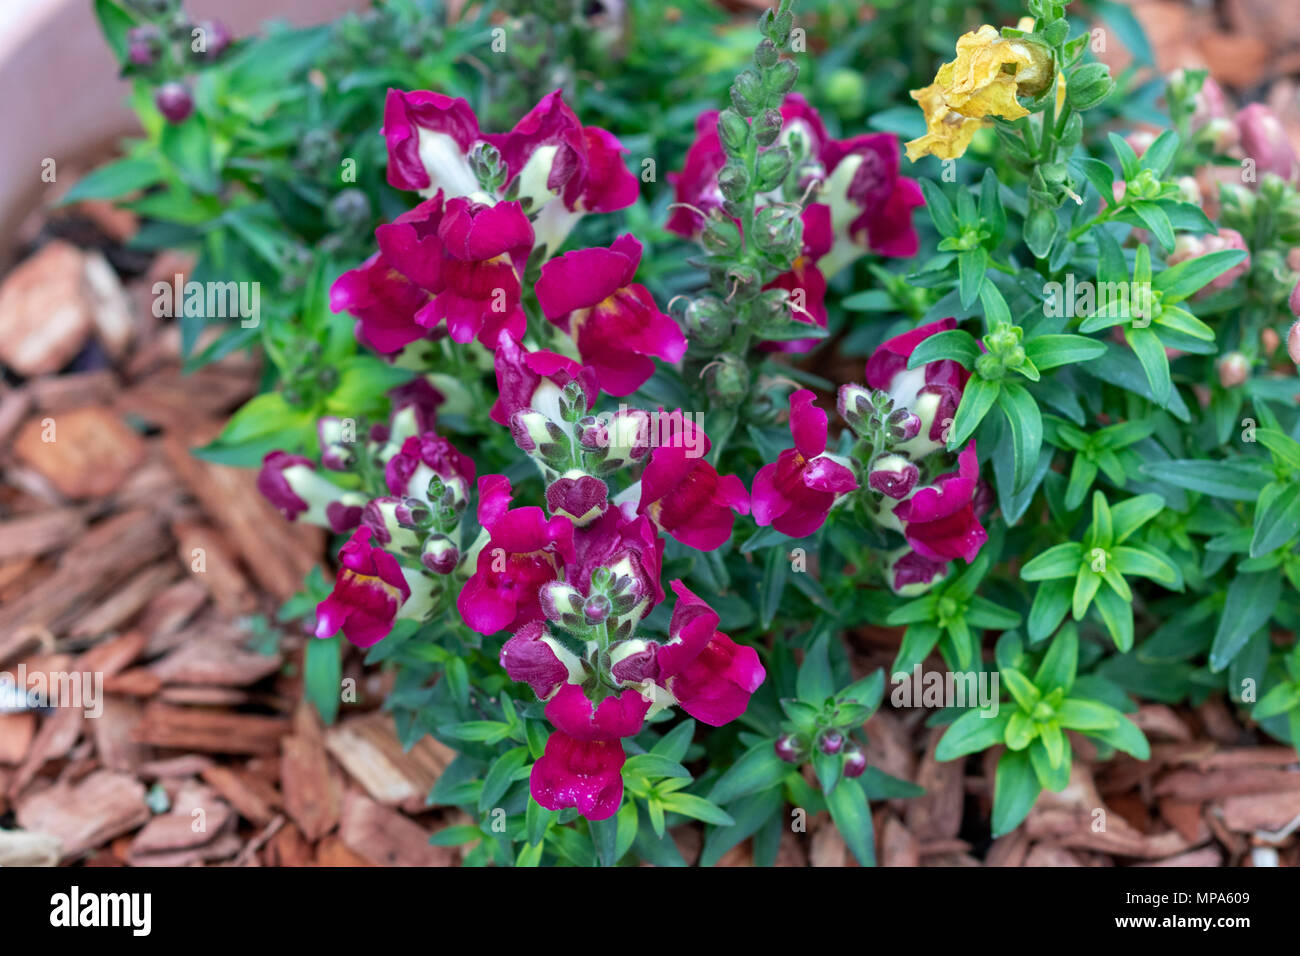 A photograph of red Snapdragon Flowers. Stock Photo